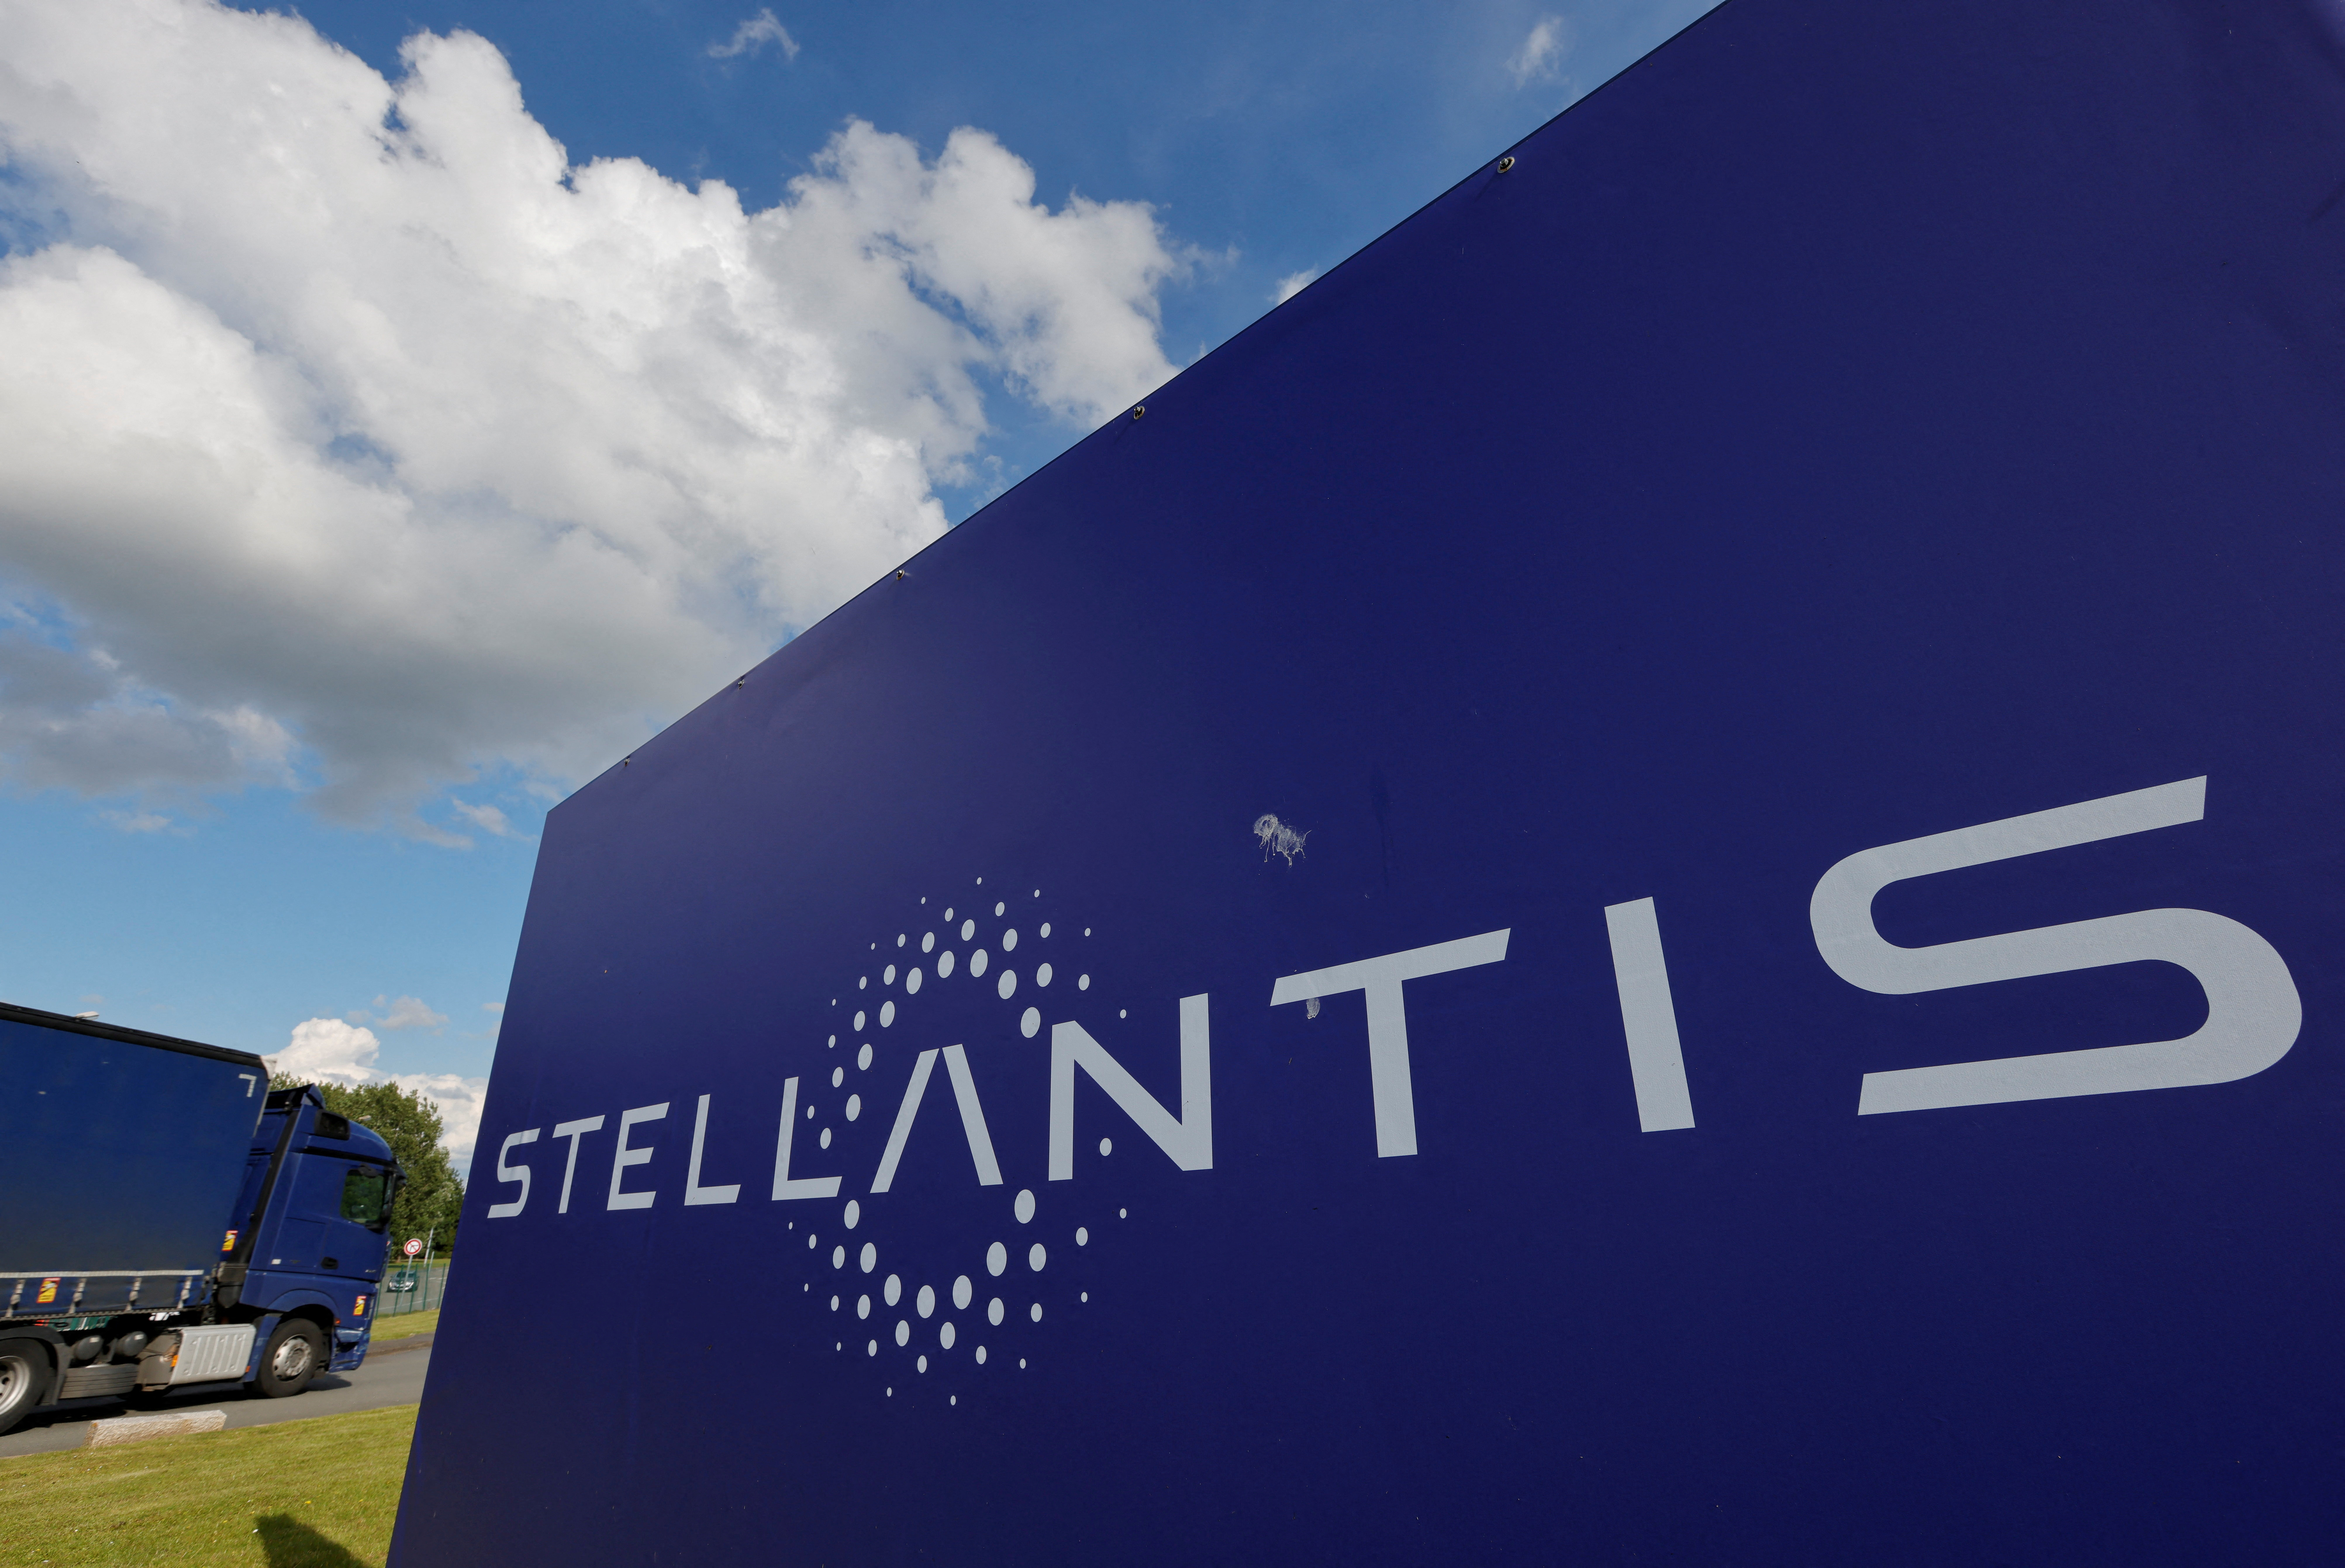 A Stellantis sign at the entrance of the carmaker's factory in Hordain, France